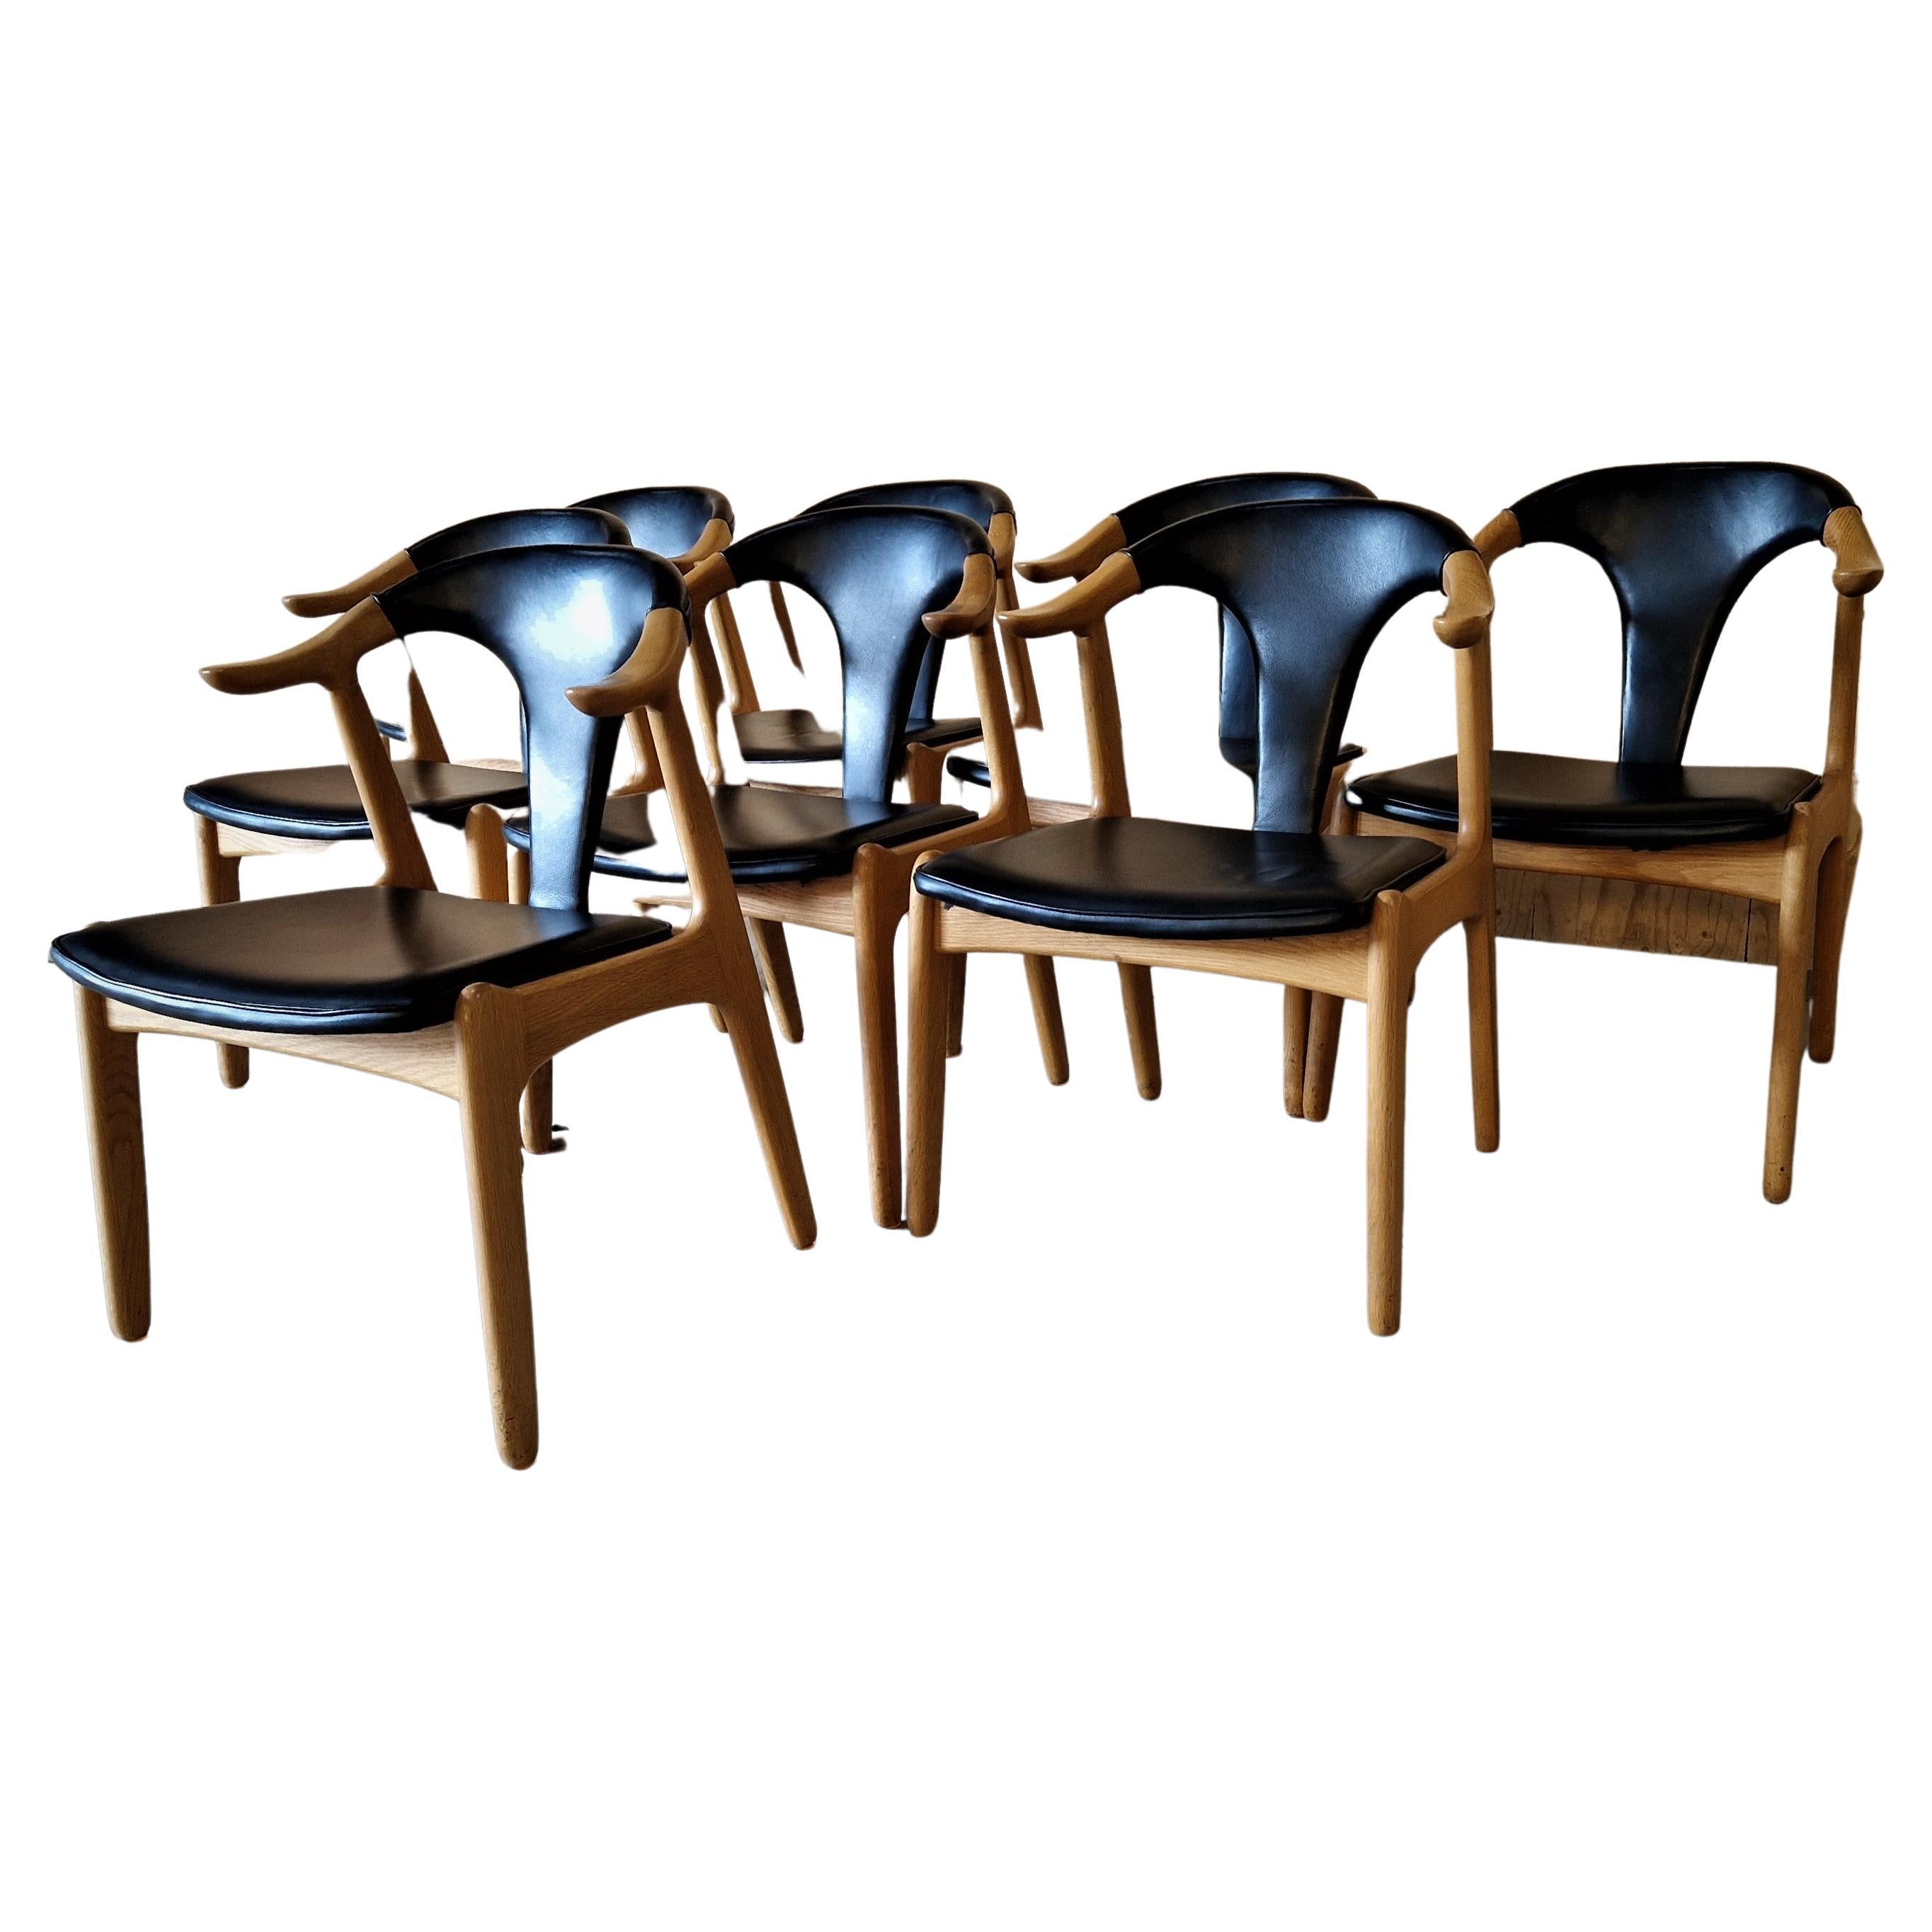 8 Scandinavian Cow Horn Chairs in Light Oak and Black Leather, Midcentury